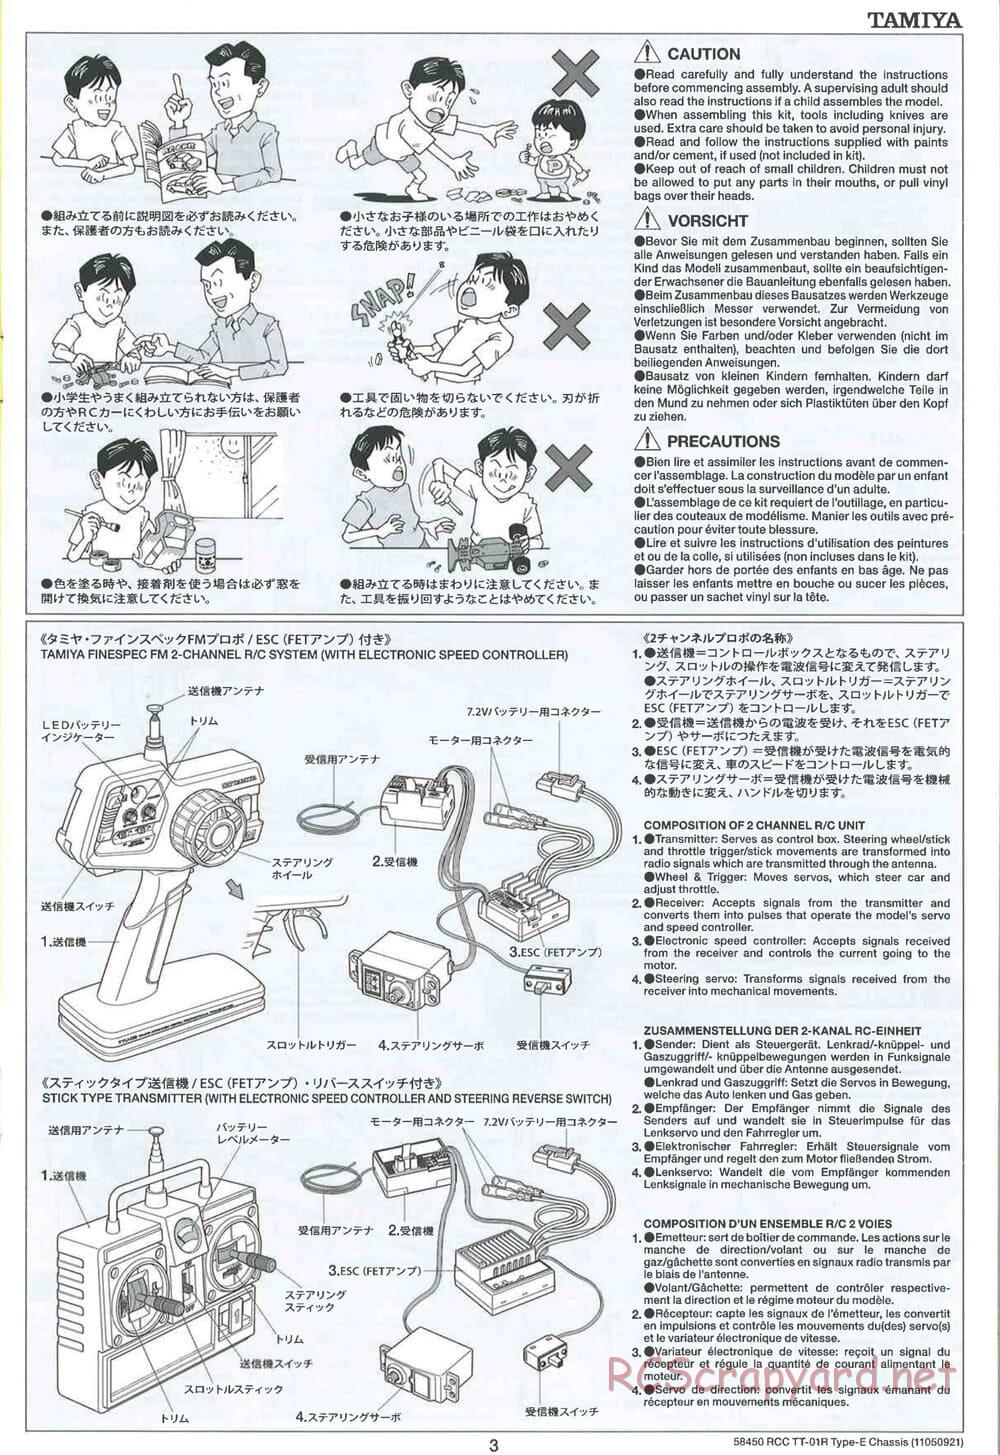 Tamiya - TT-01R Type-E Chassis - Manual - Page 3